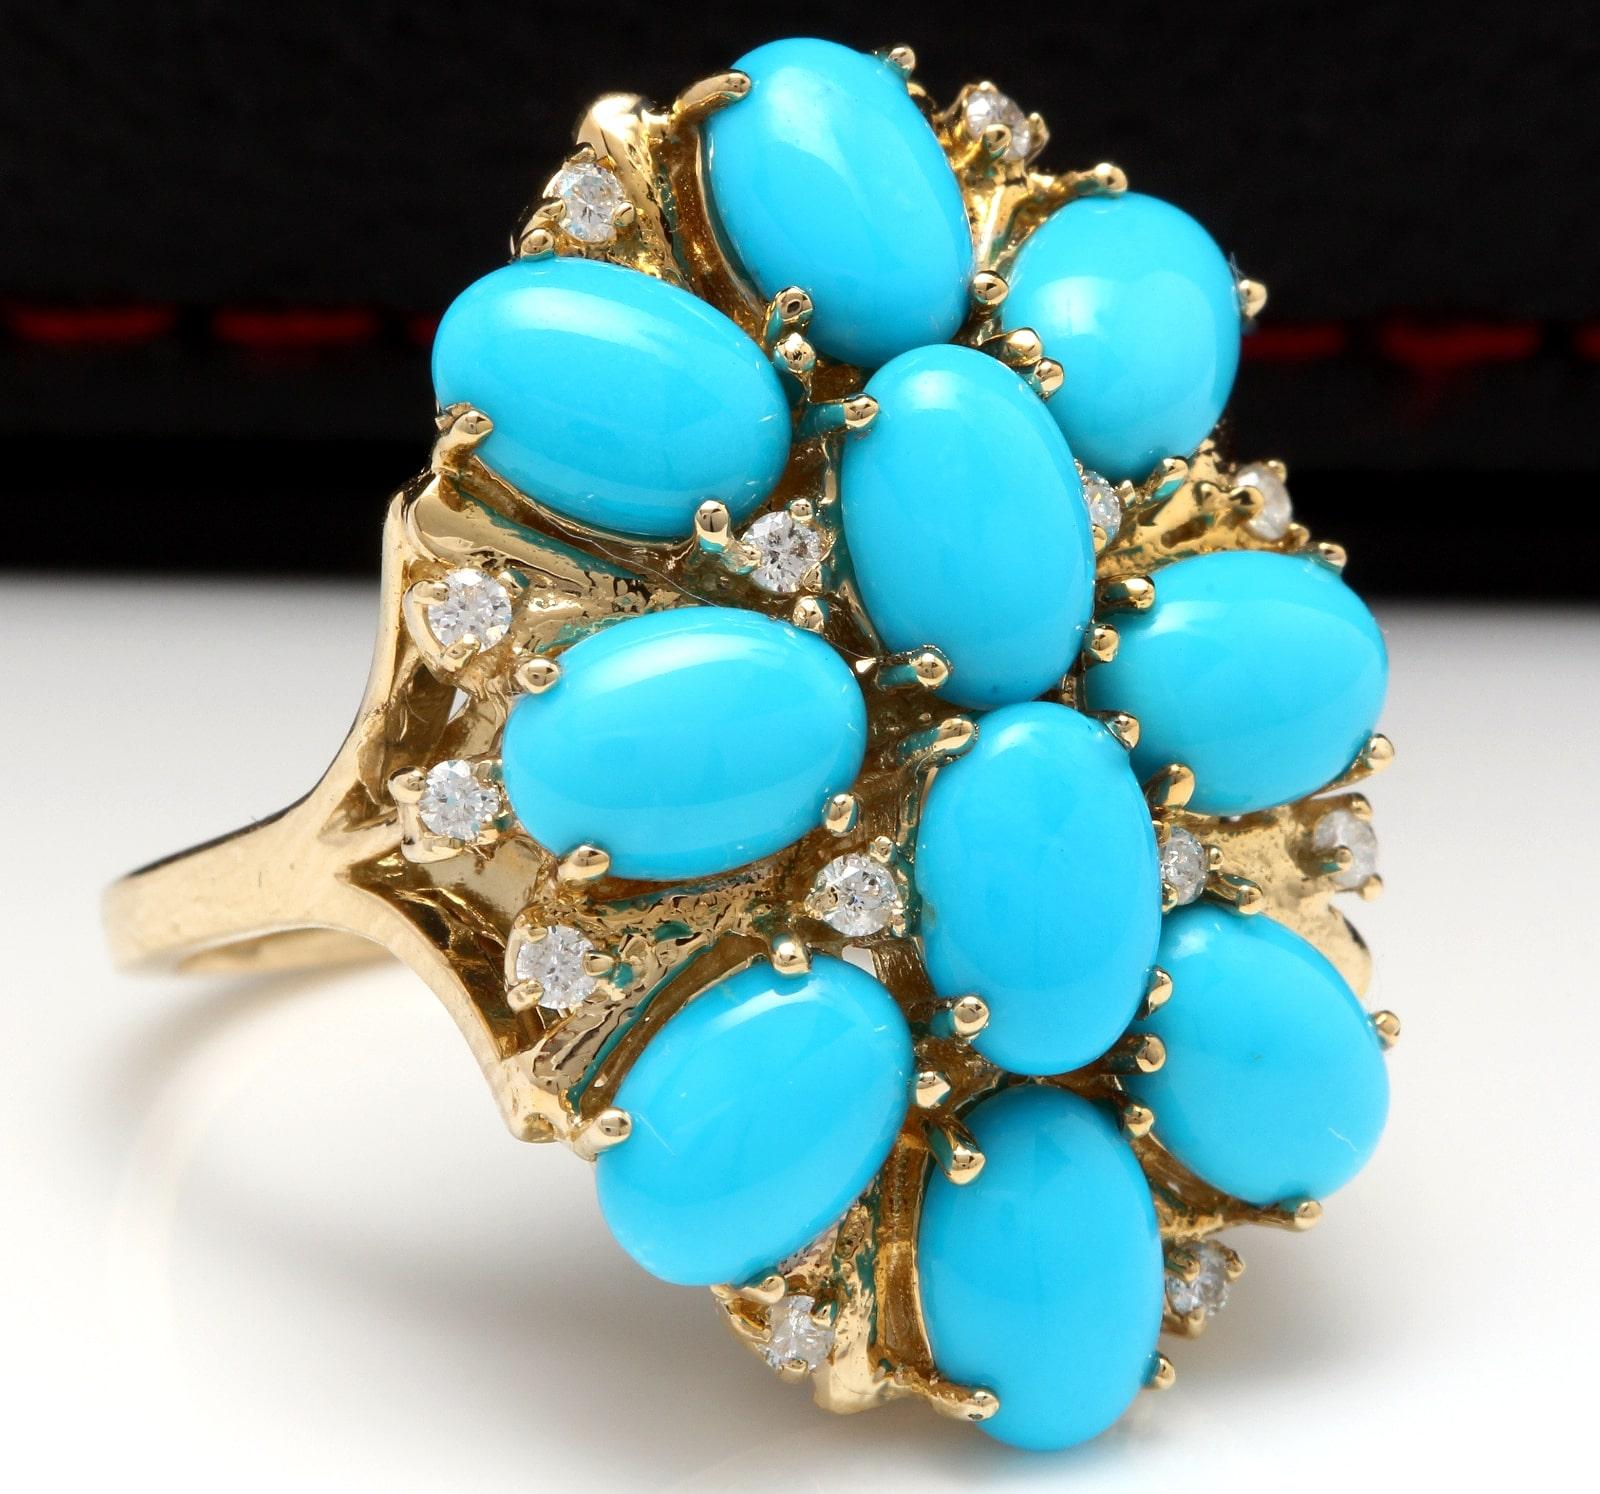 6.80 Carats Impressive Natural Turquoise and Diamond 14K Yellow Gold Ring

Suggested Replacement Value Approx. $6,400.00

Total Natural Oval Turquoise Weight is: Approx. 6.50 Carats 

Turquoise Measures: 7 x 5mm 

Natural Round Diamonds Weight: